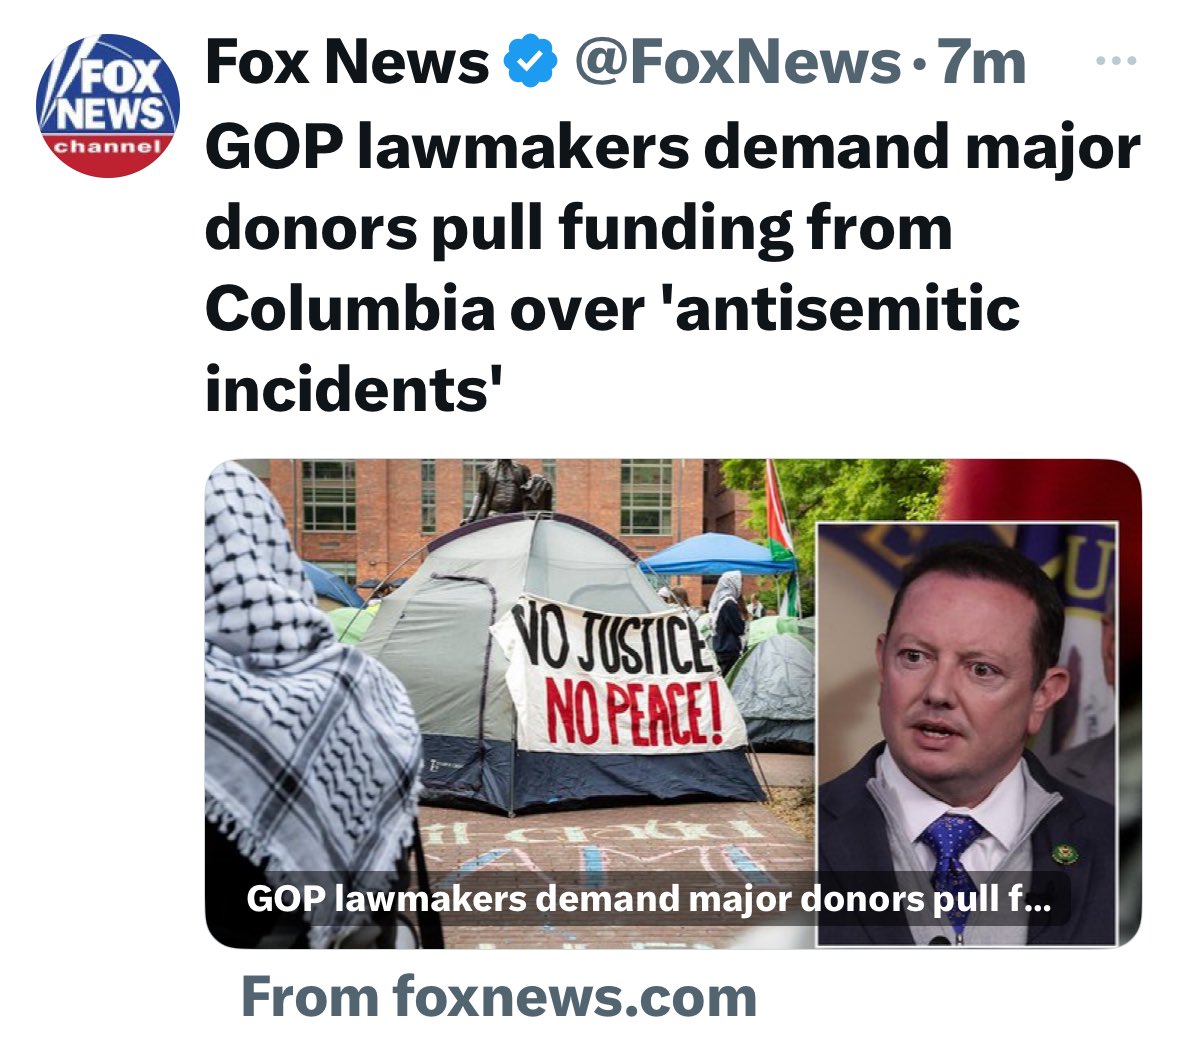 Taxpayers should not be forced to fund antisemitism.